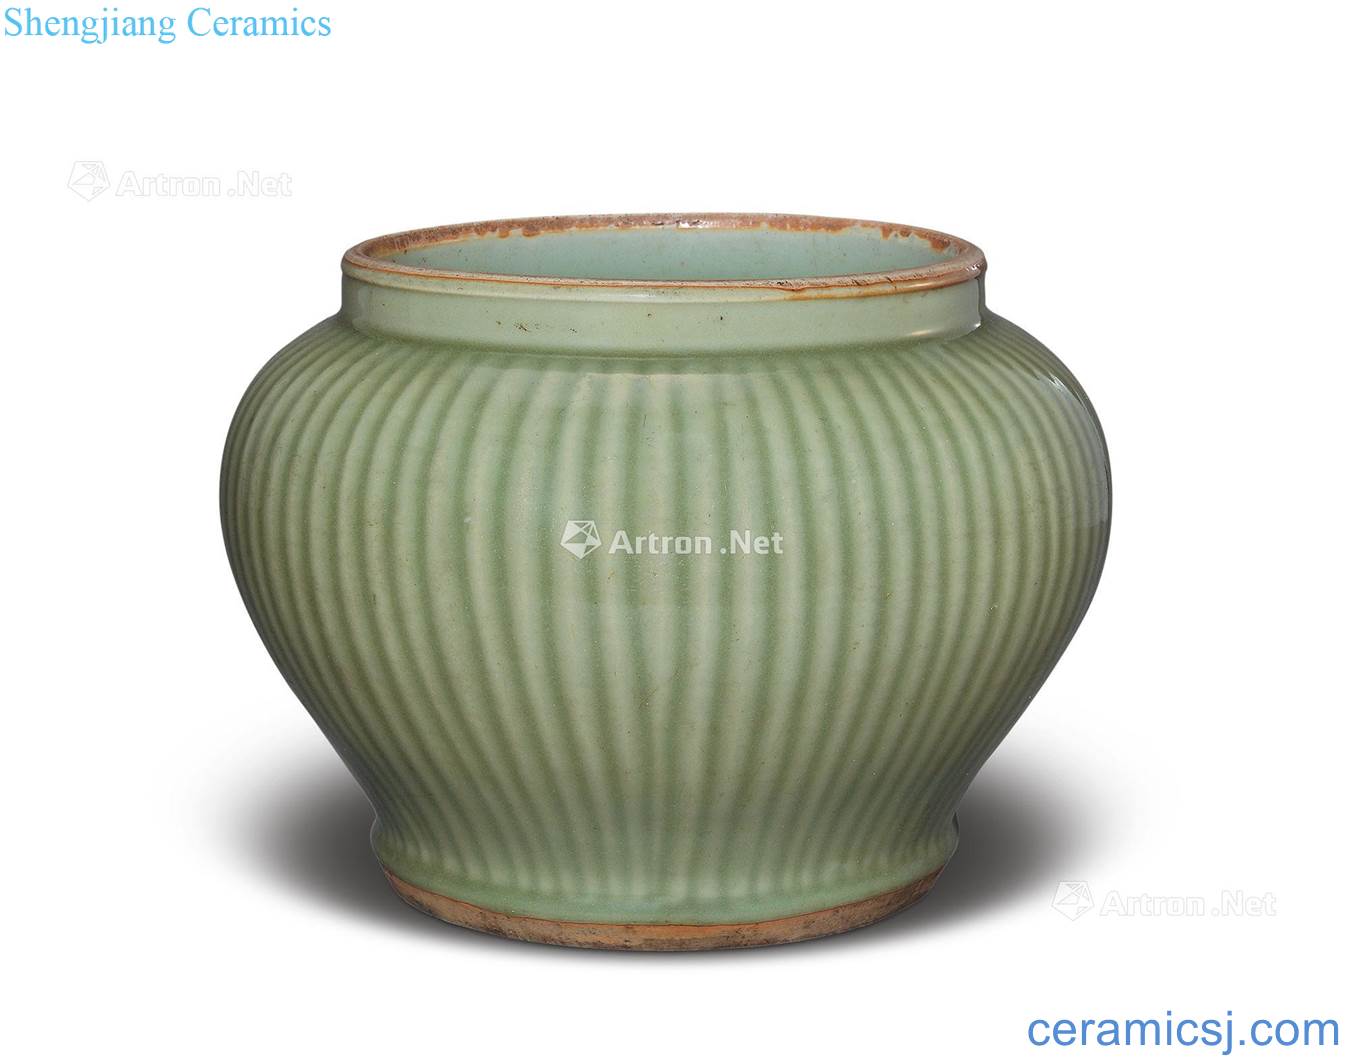 Early Ming dynasty Longquan celadon melon leng cans